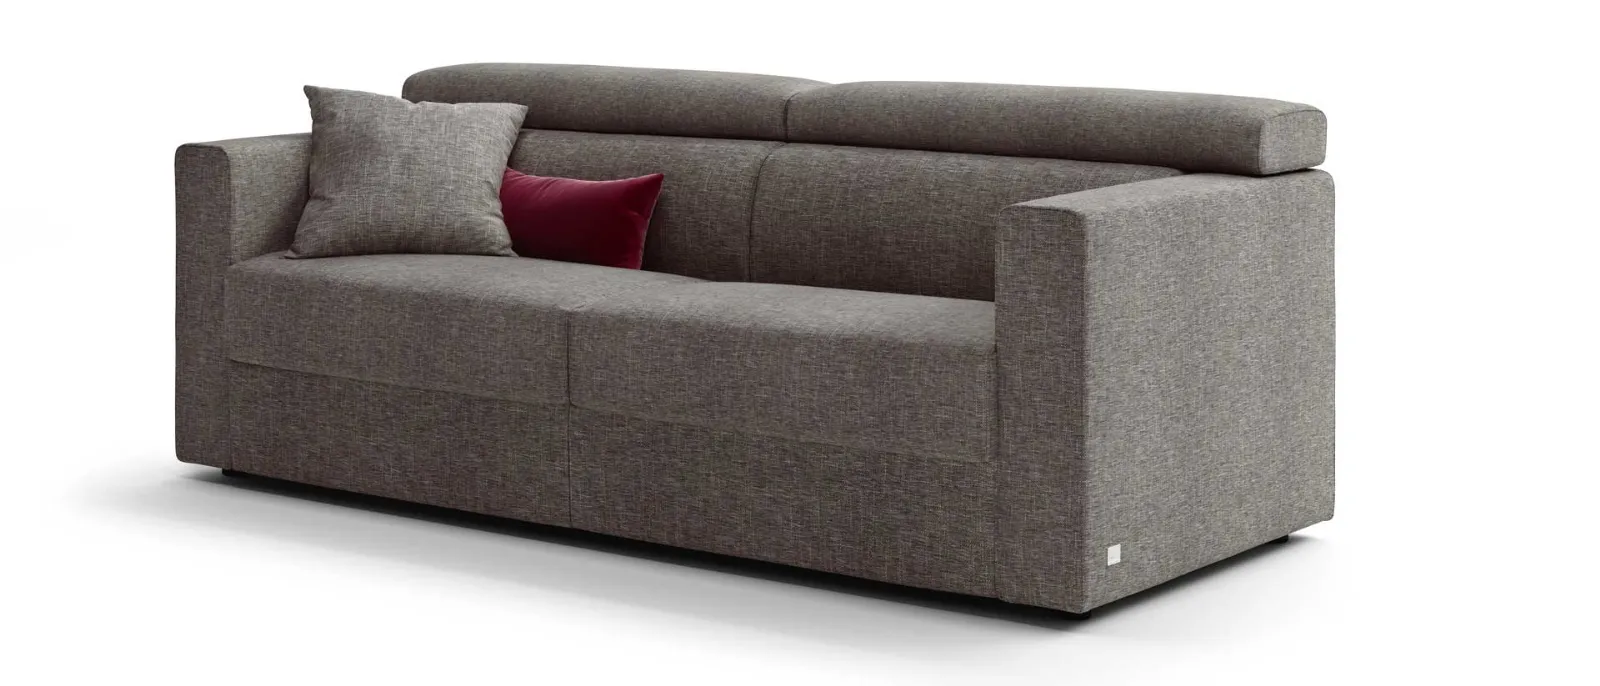 Sofa bed with headrest